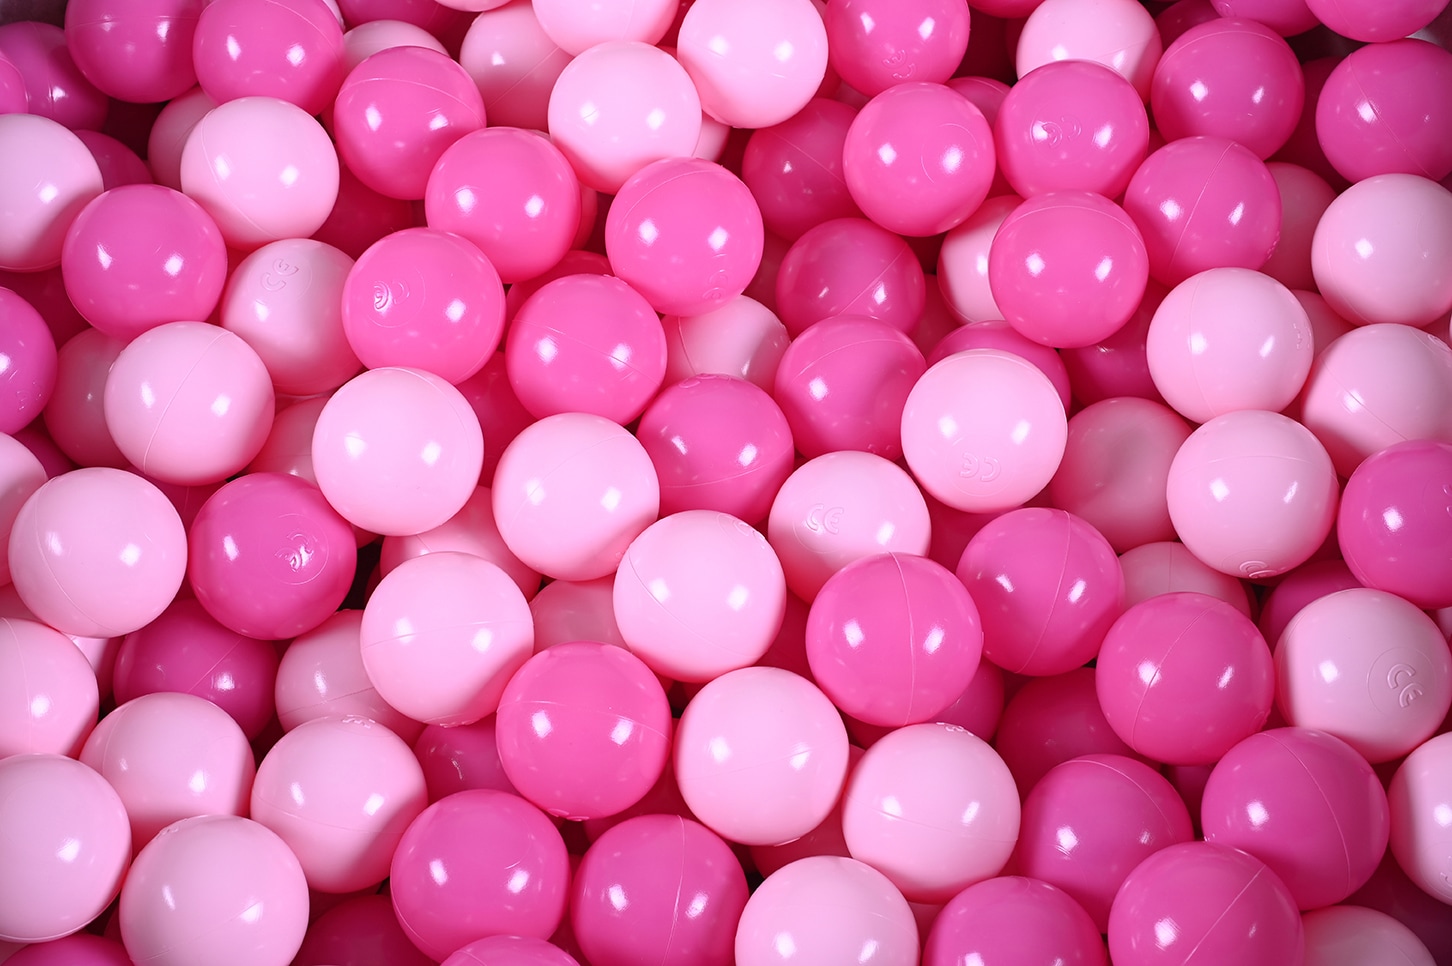 Knorrtoys® Bällebad »Soft, Grey White Dots«, mit 300 Bällen soft pink; Made in Europe